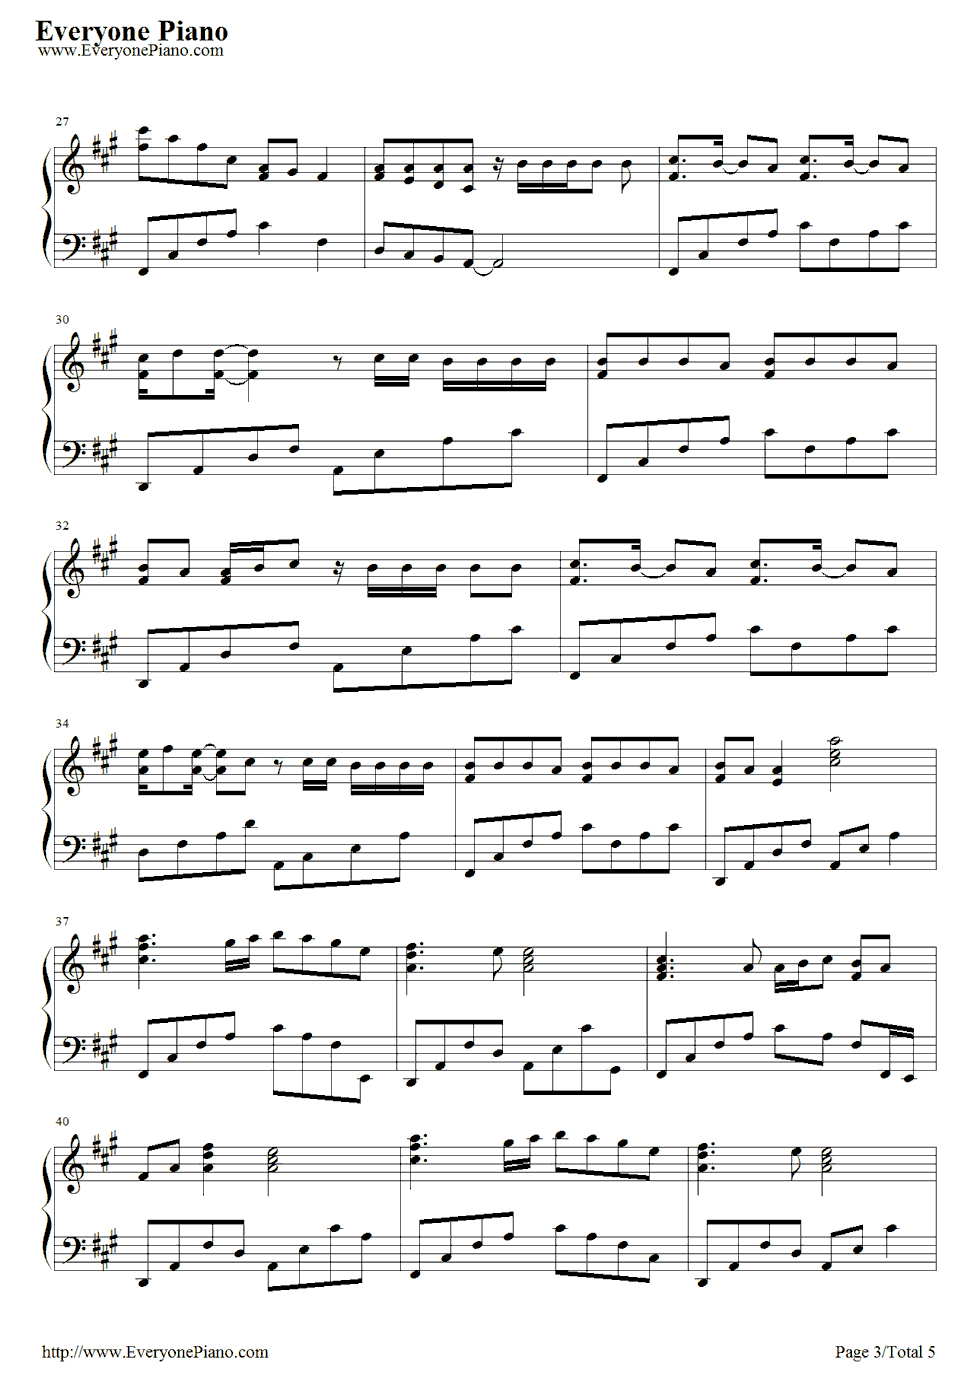 Airplanes-B.o.b. Feat. Hayley Williams Stave Preview 3 | Music - Airplanes Piano Sheet Music Free Printable